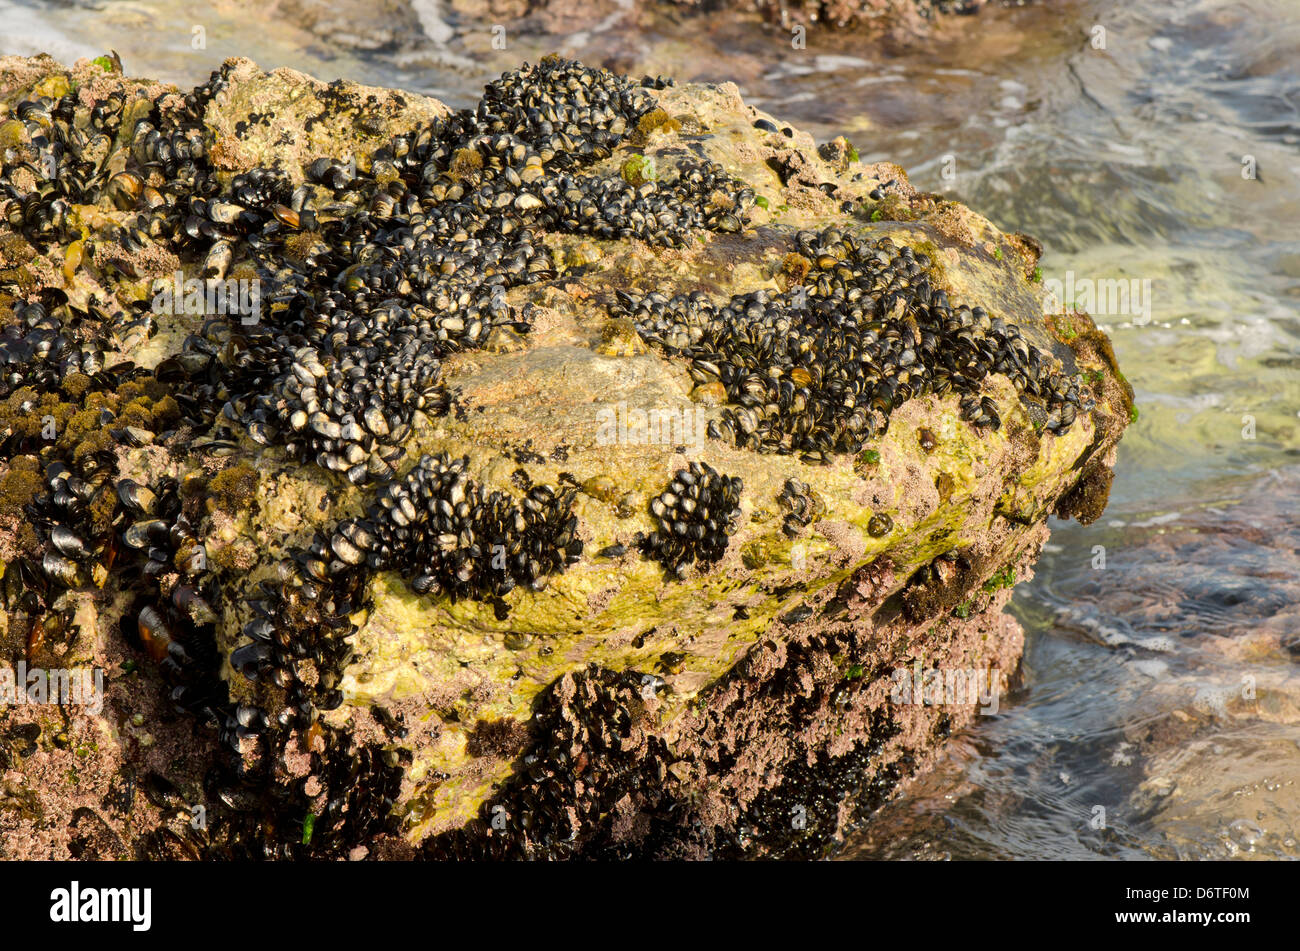 Mussels attached to rocks in the mediterranean sea Stock Photo